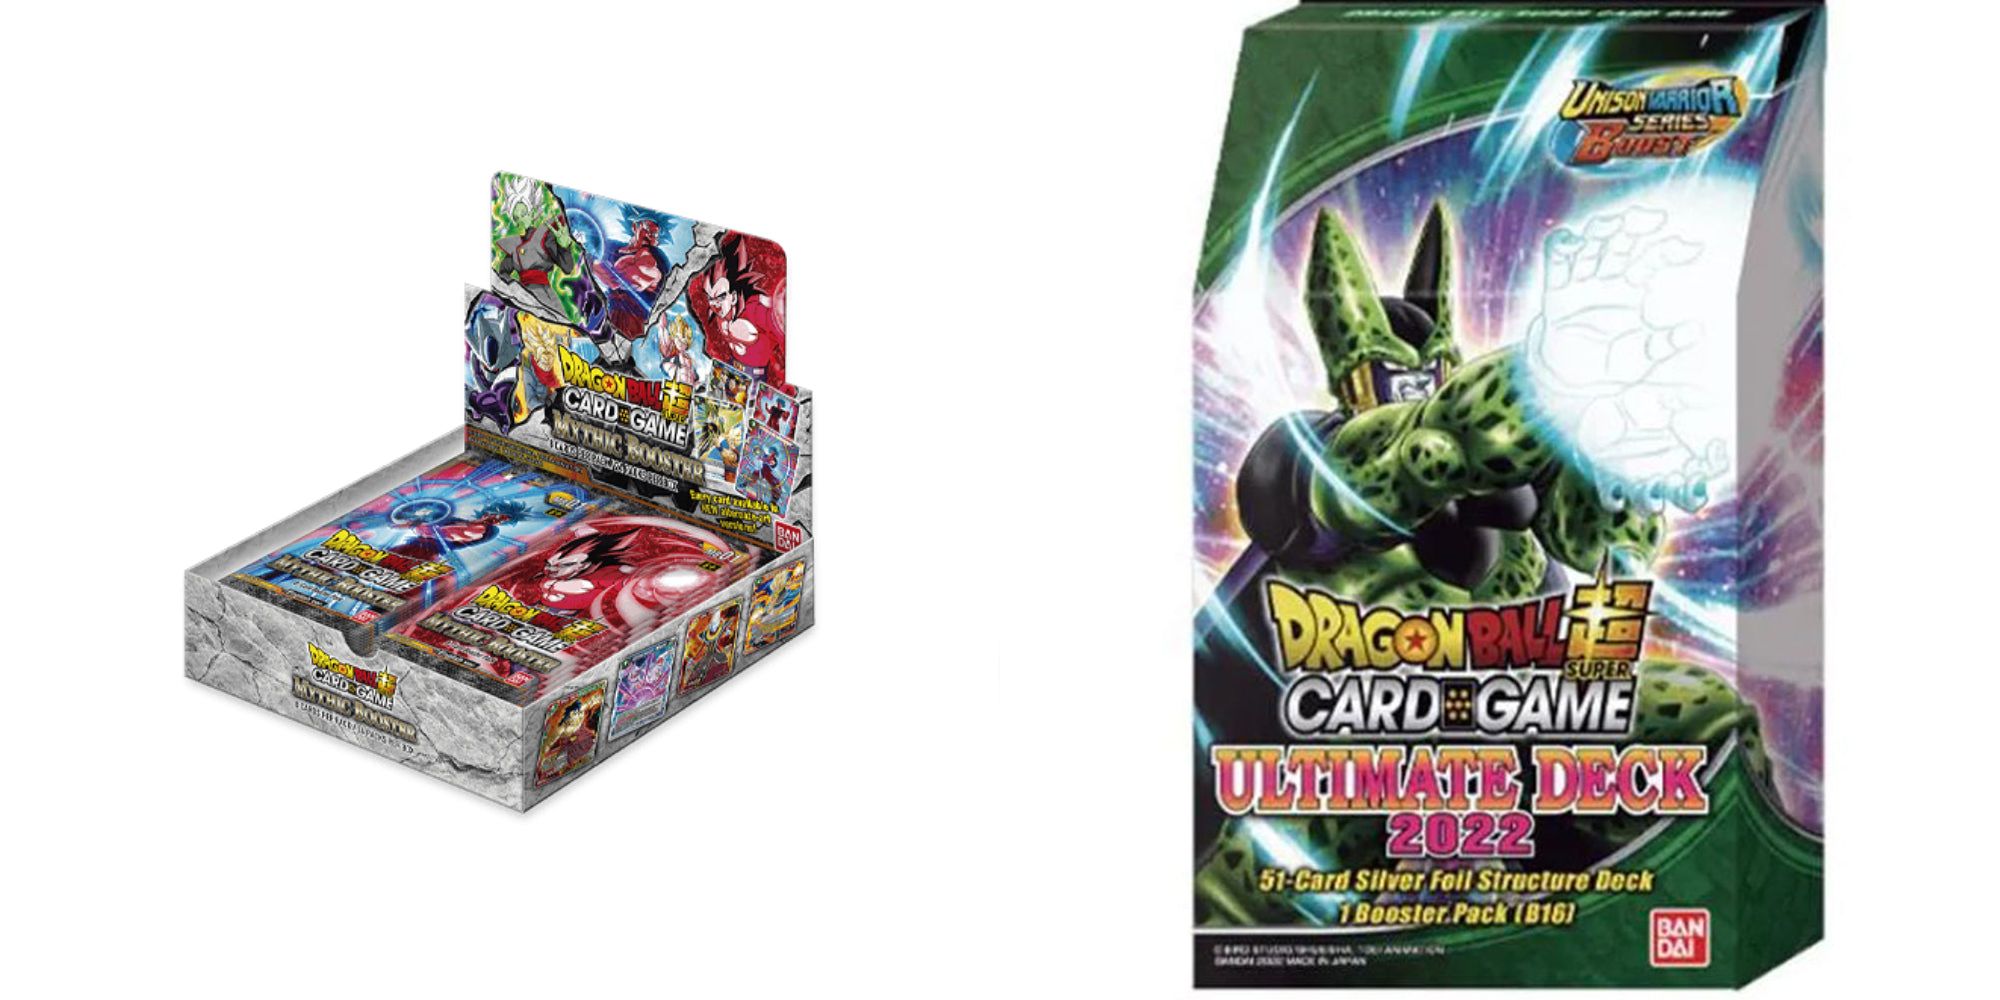 Mythic Booster and Ultimate Deck 2022 in Dragon Ball Super Card Game 